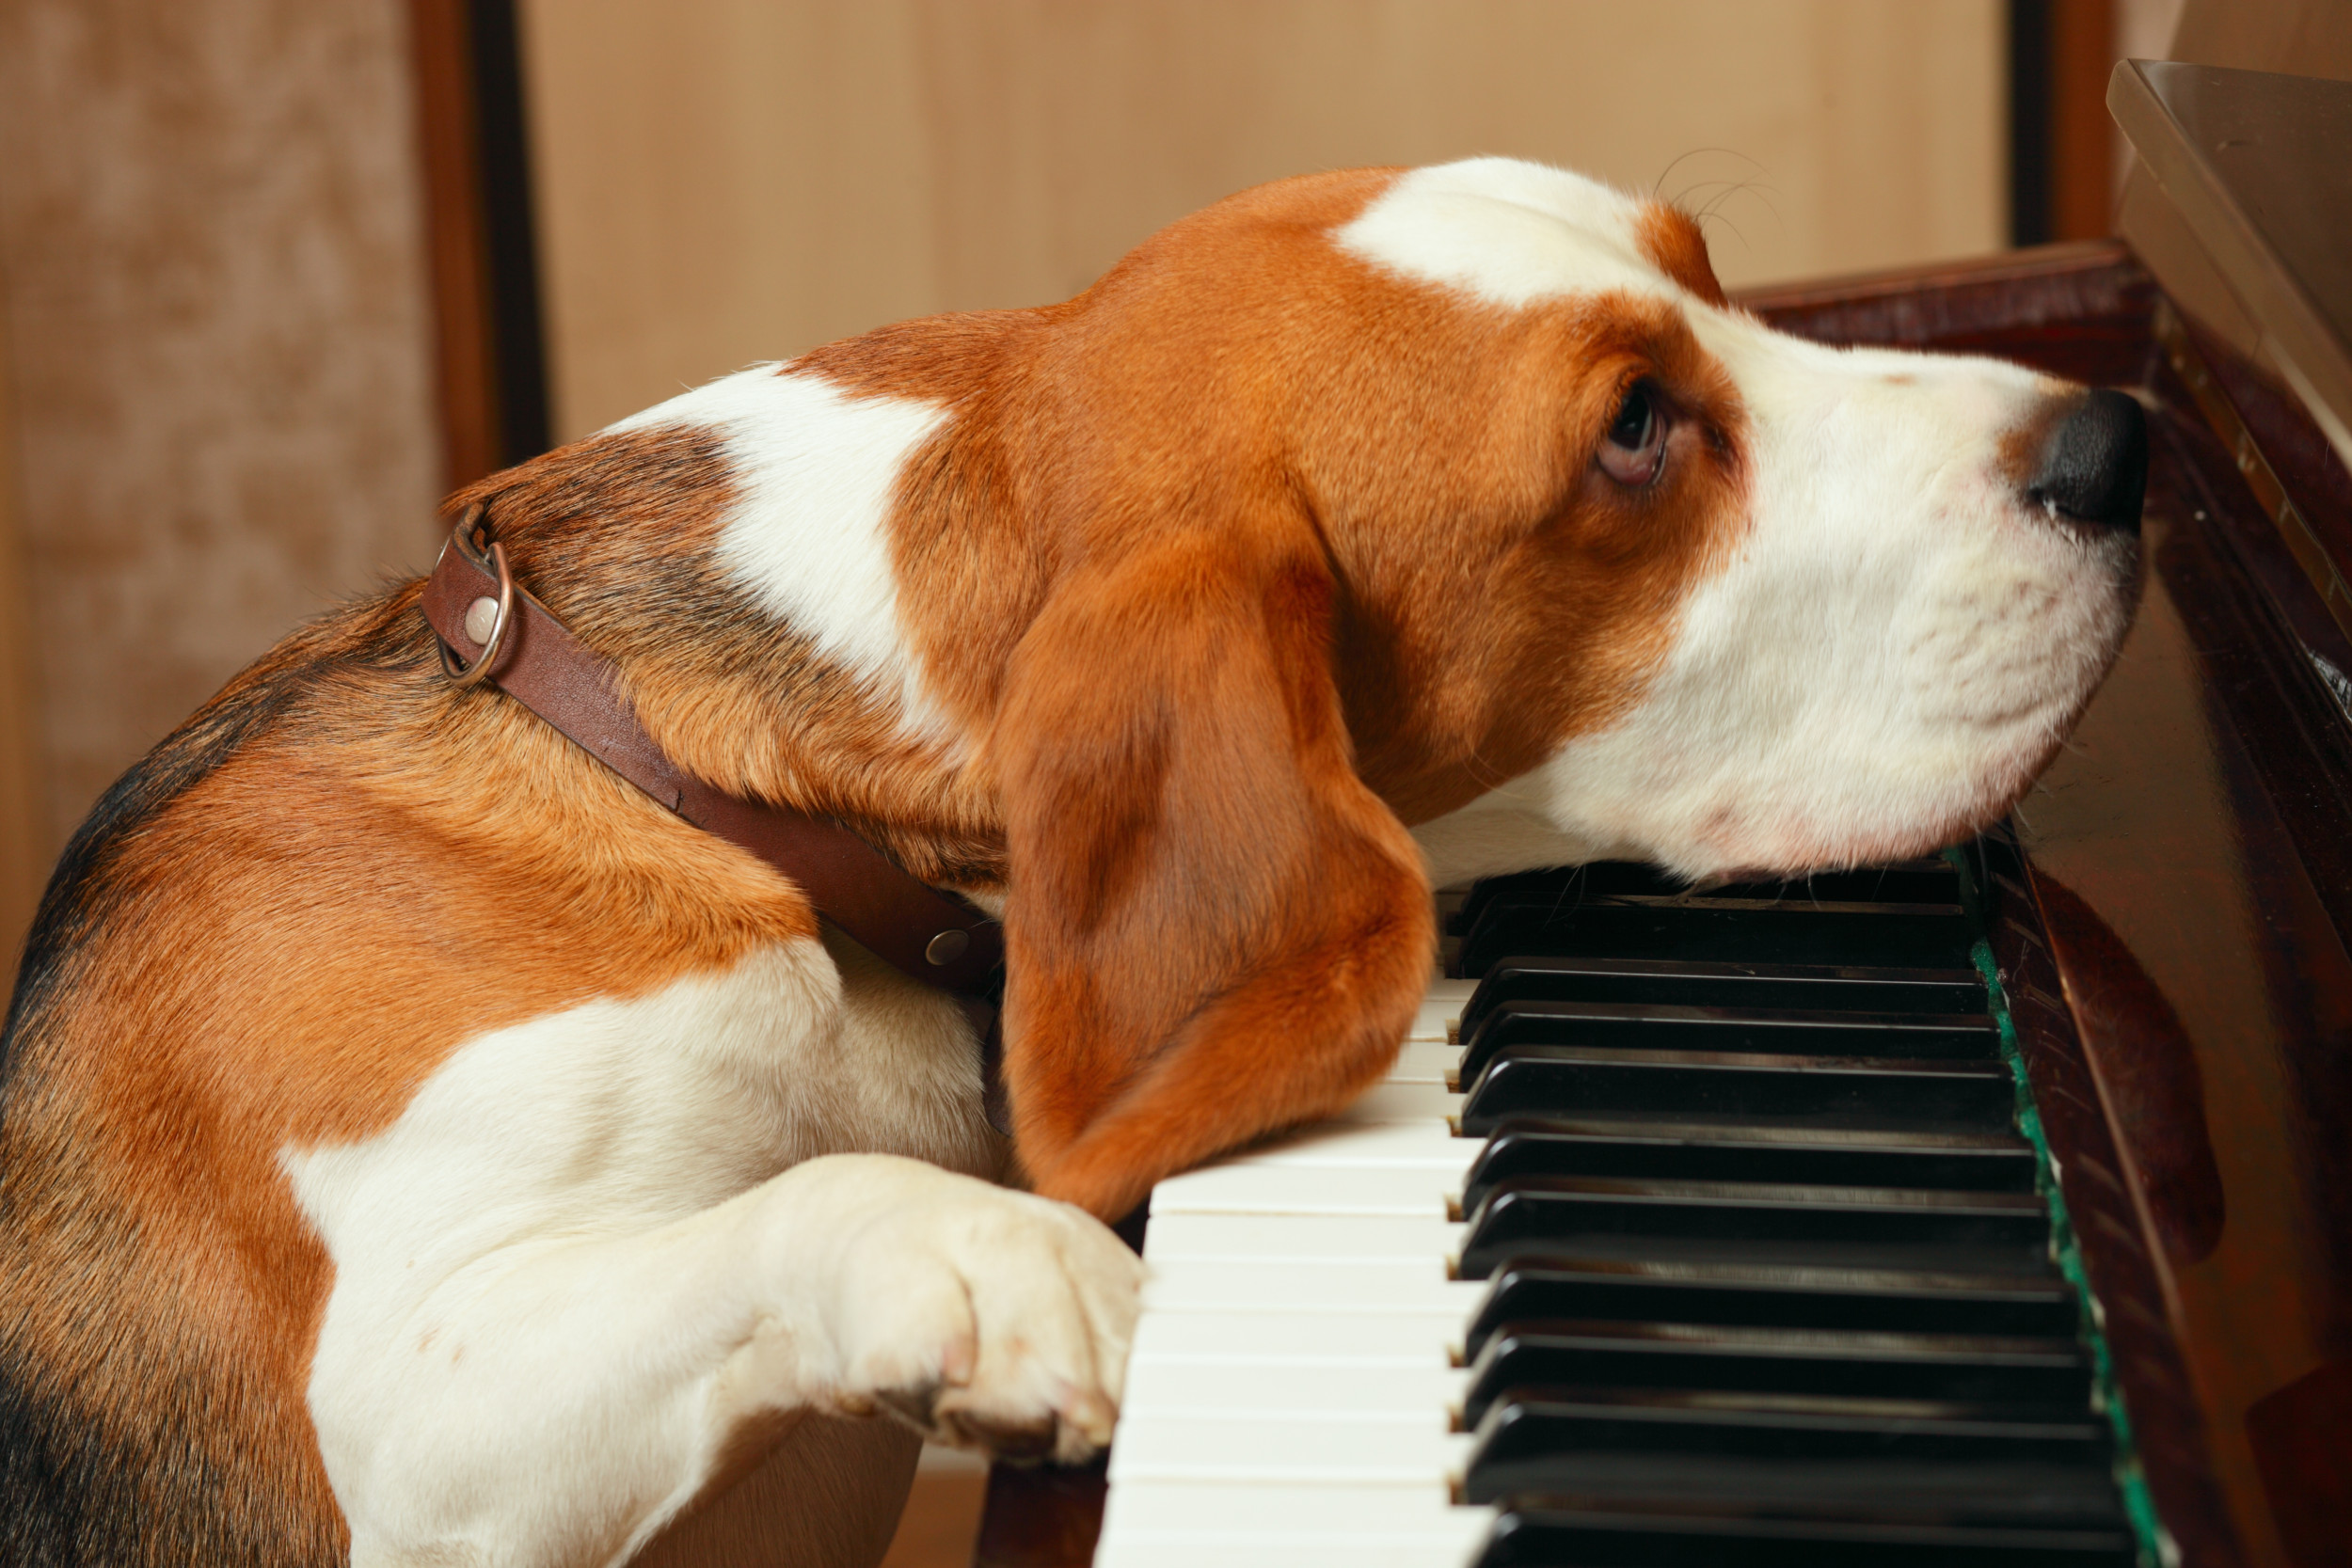 Dog Who Sings Along to the Piano Stuns the Internet: ‘Get Him a Grammy’